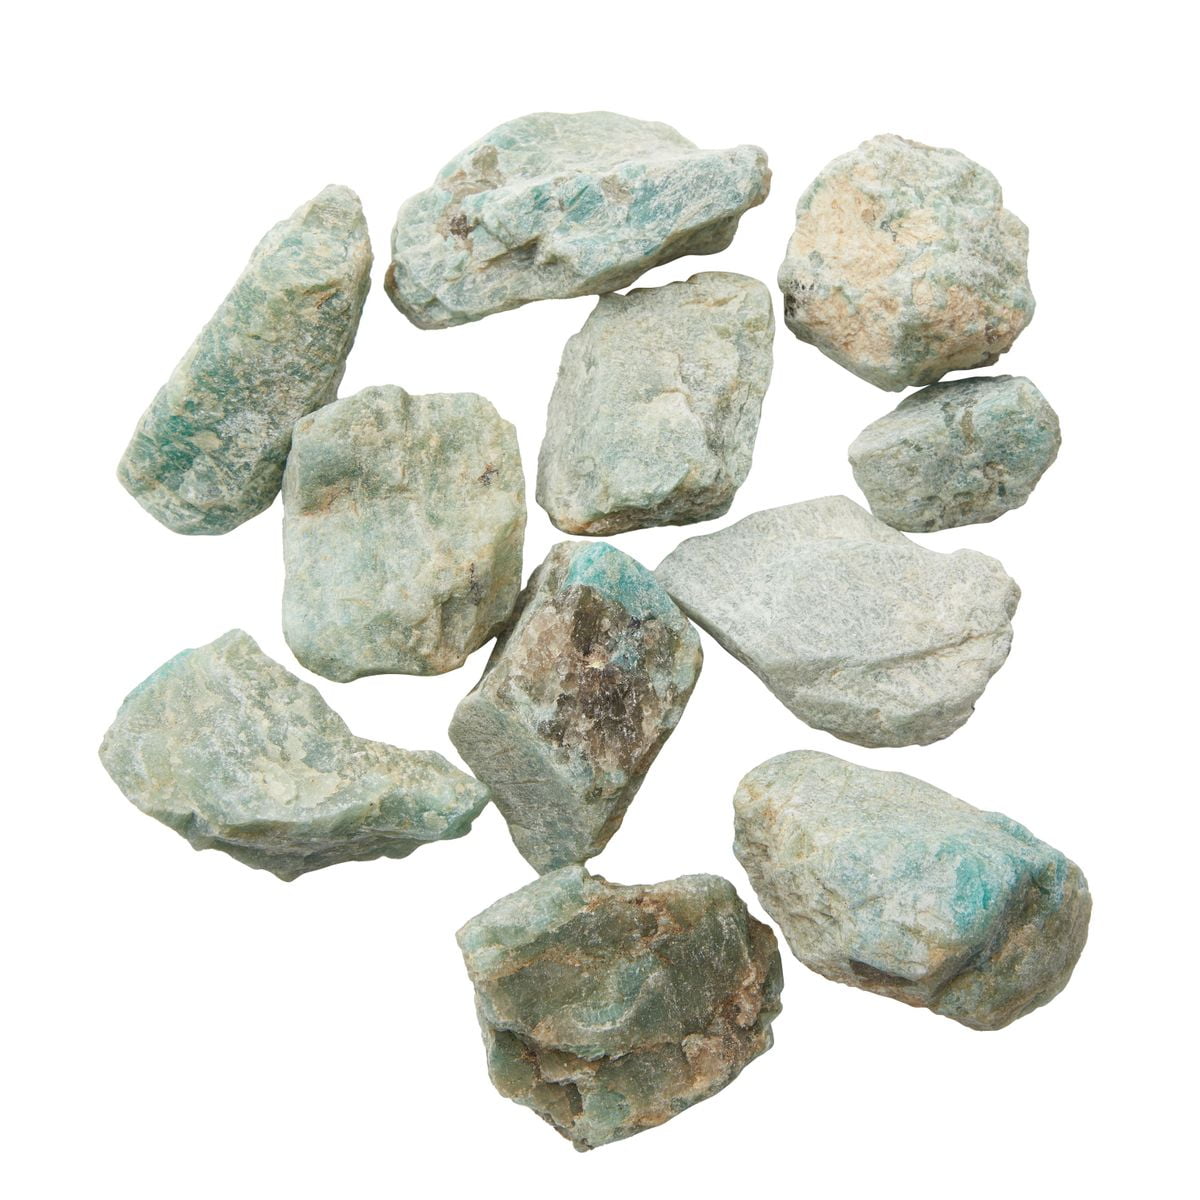 1 lb of Tumbled Amazonite Natural Rock Chips with Info Card 